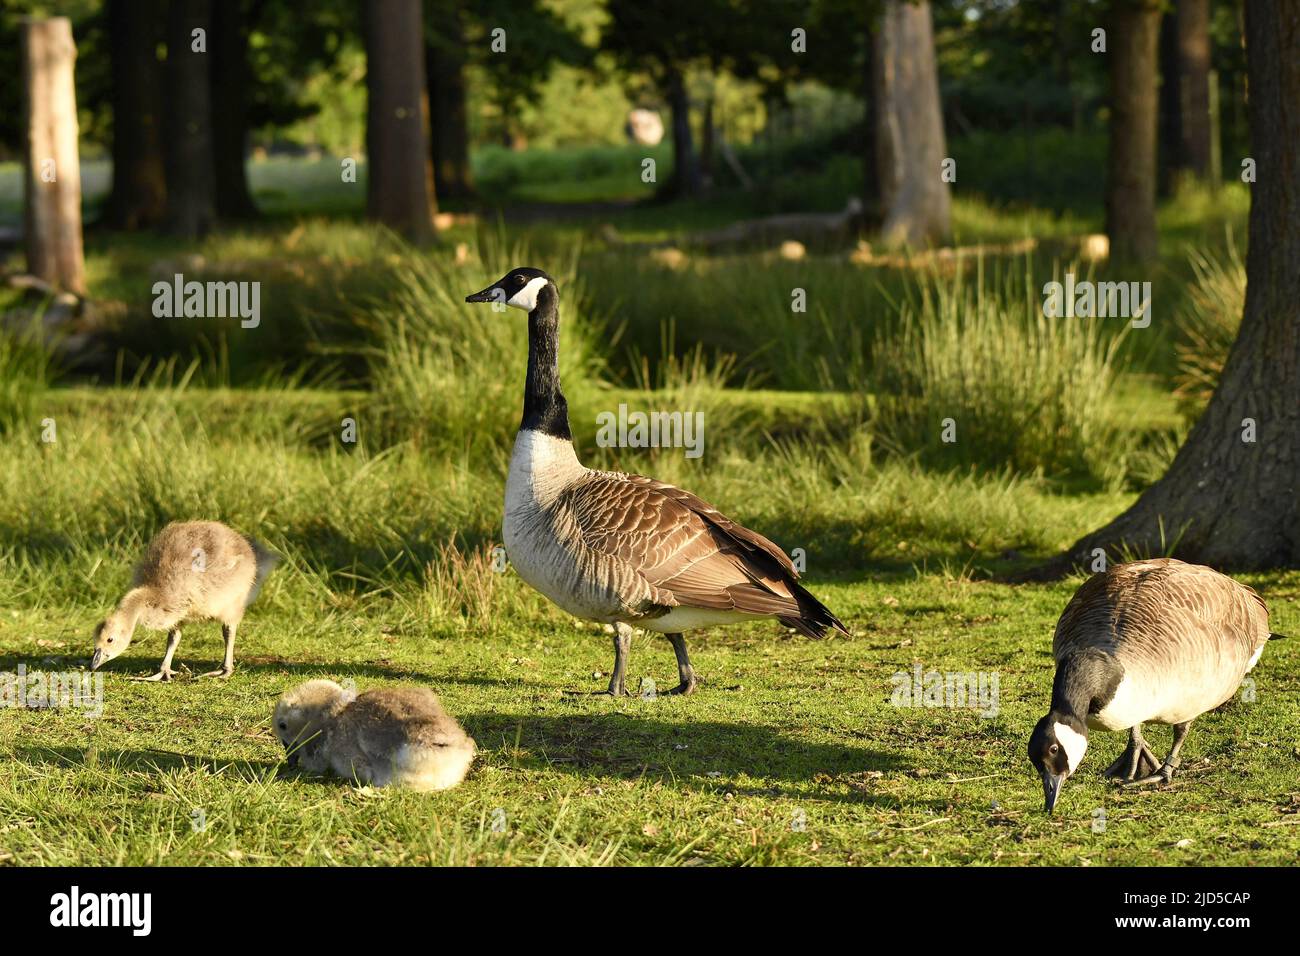 Canada goose (Branta canadensis) adults with goslings feeding on grass in Richmond Park Surrey England UK. Stock Photo